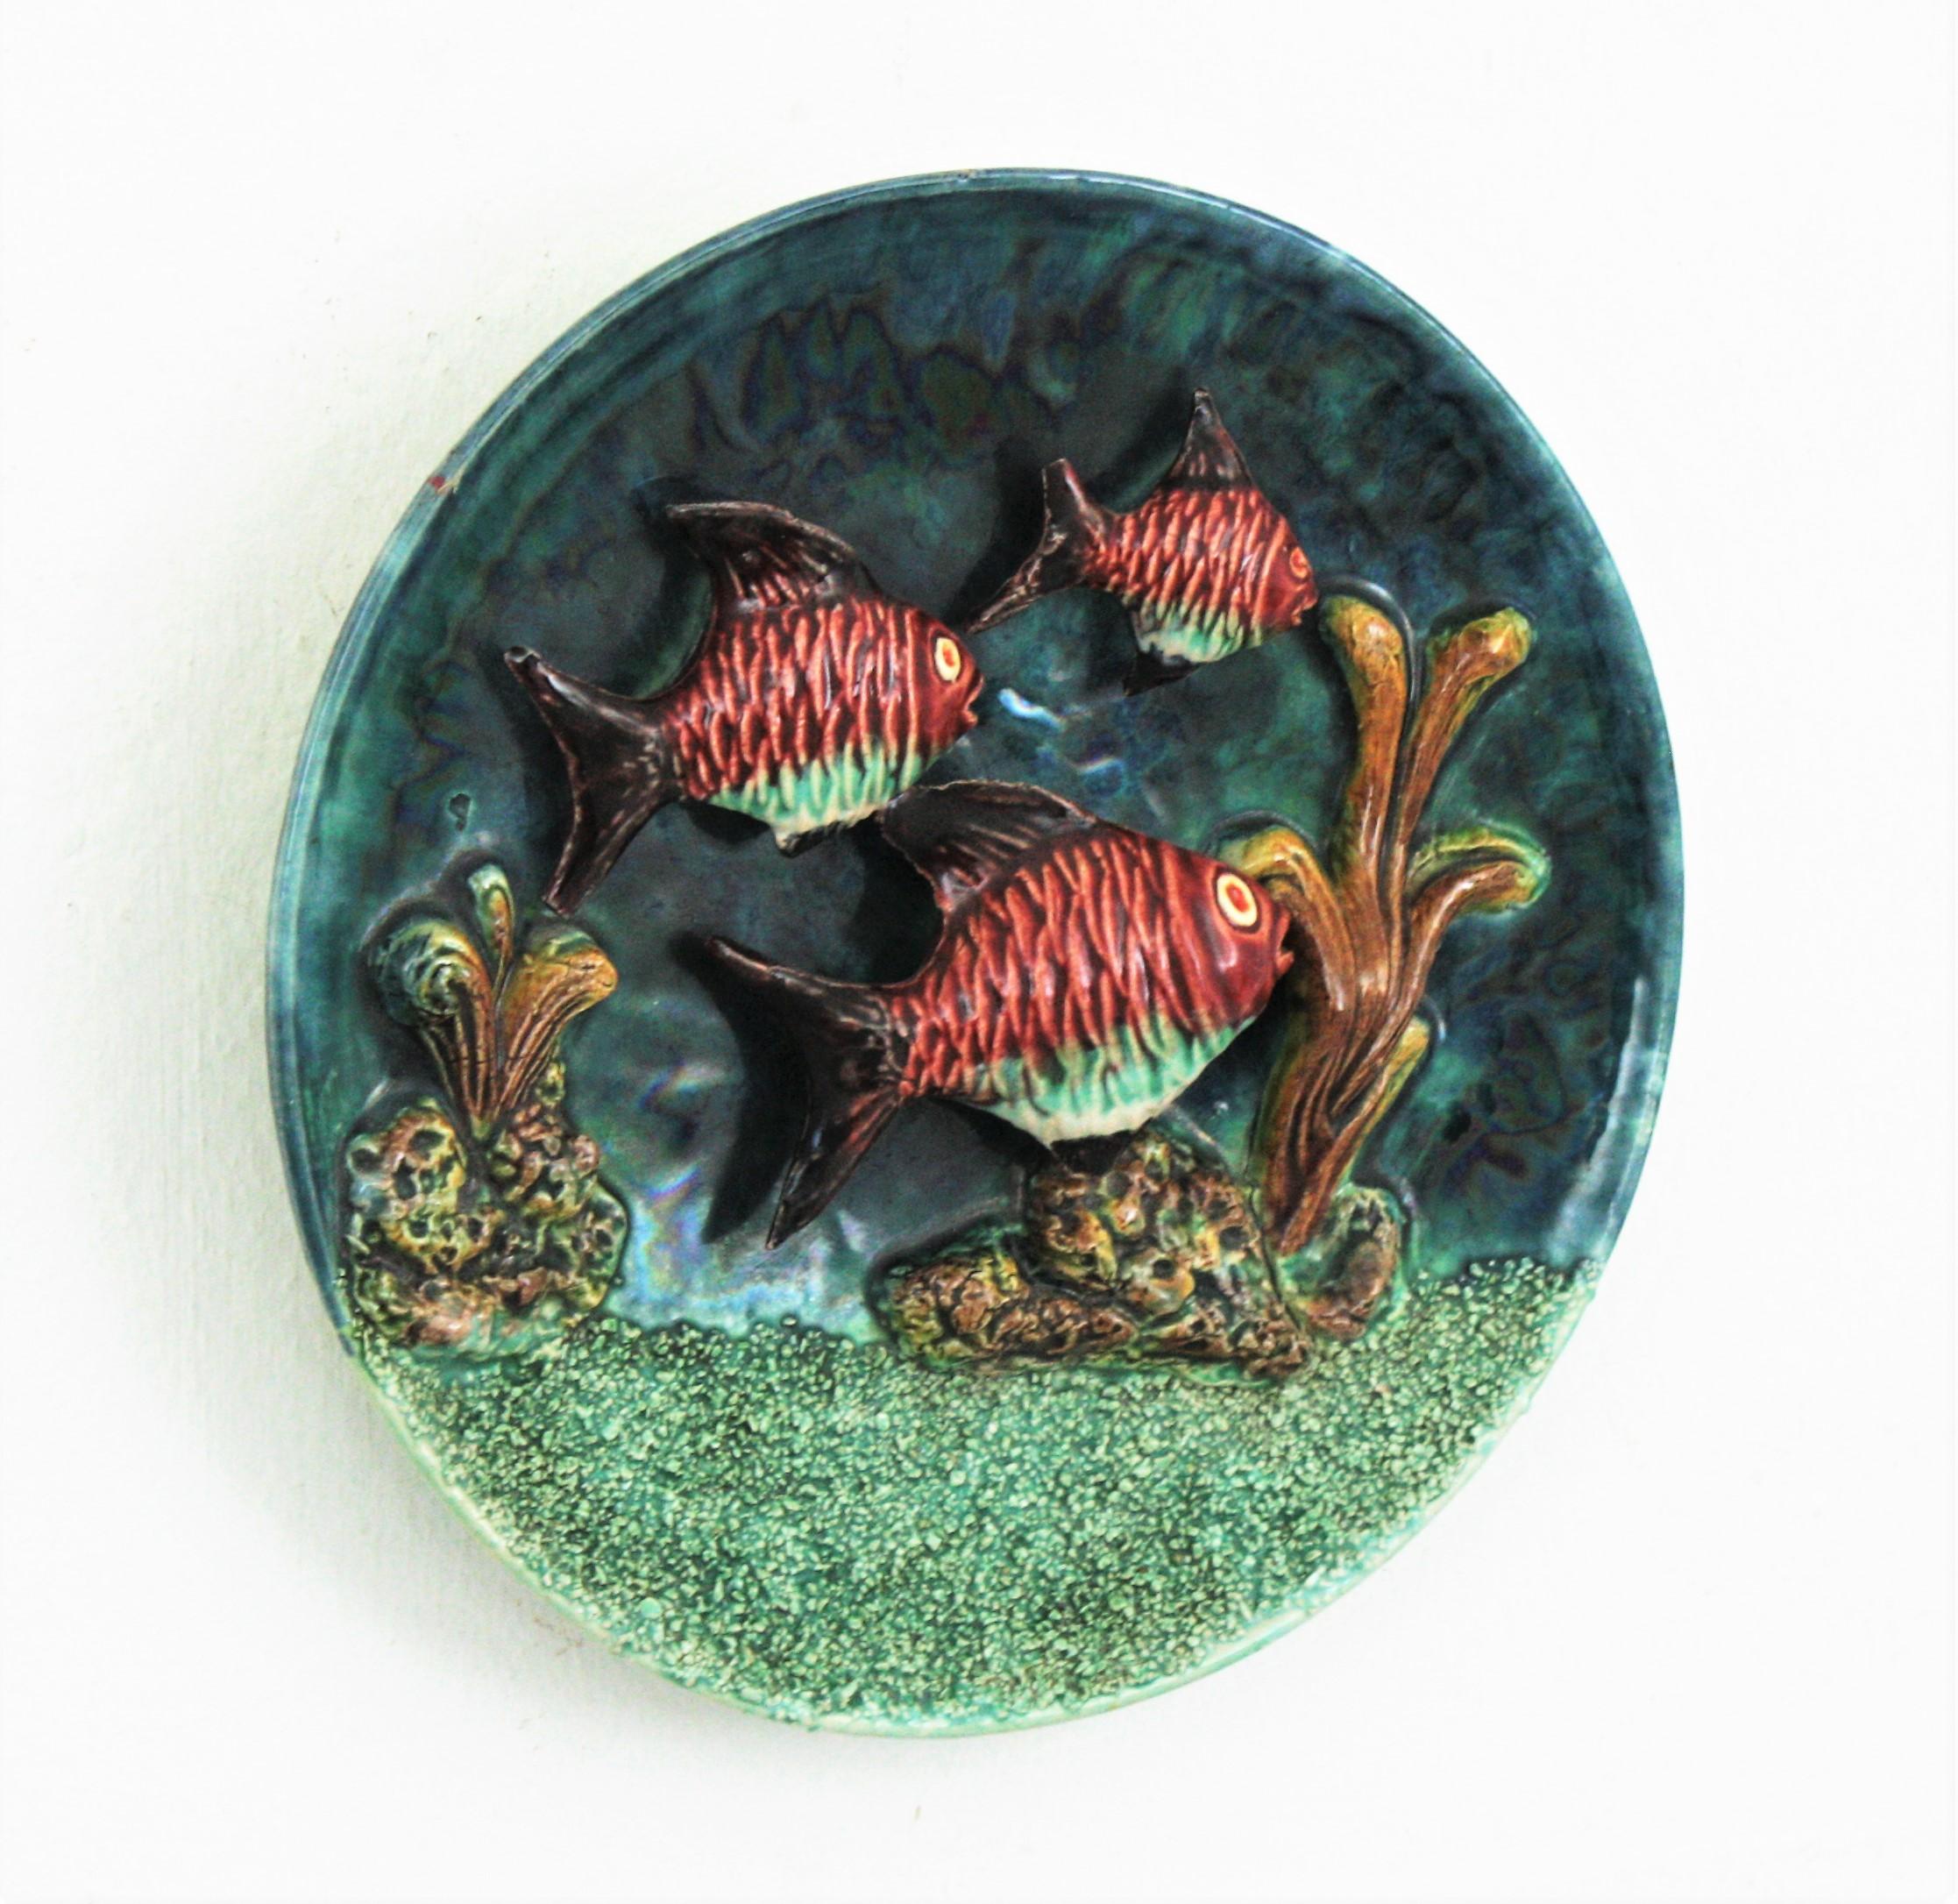 Eye-catching hand painted Majolica glazed ceramic deep sea landscape trompe l'oeil wall plate, Portugal, 1960s.
Such a realistic and colorful representation with fishes on a sea landscape background.
This wall plate will add a cool midcentury